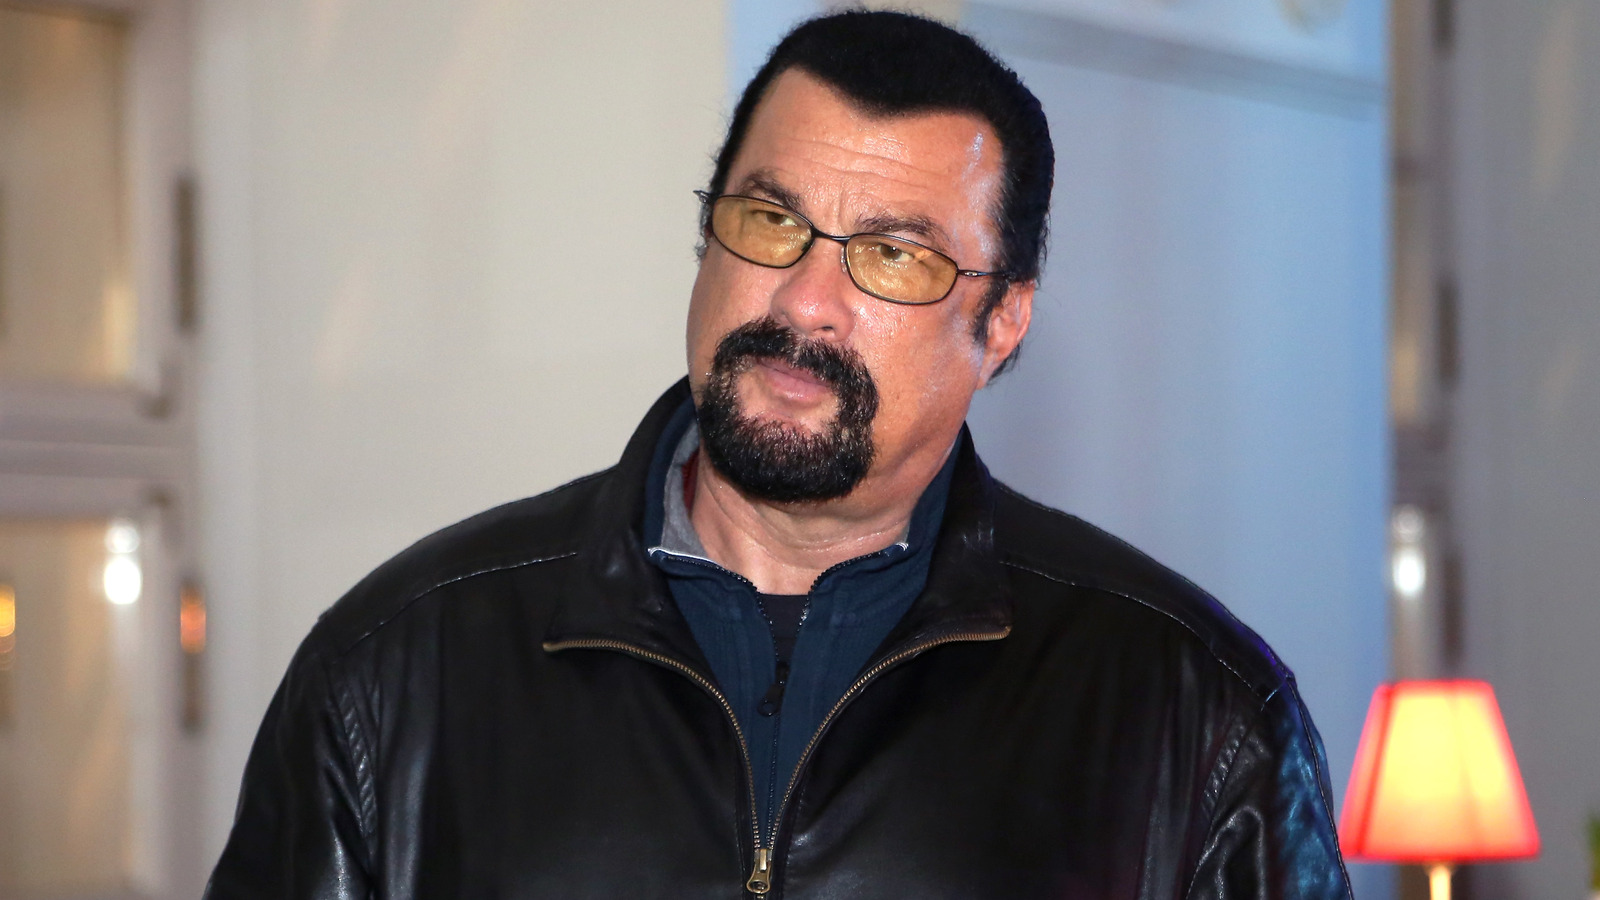 The Causes You Don't Hear A lot From Steven Seagal Anymore